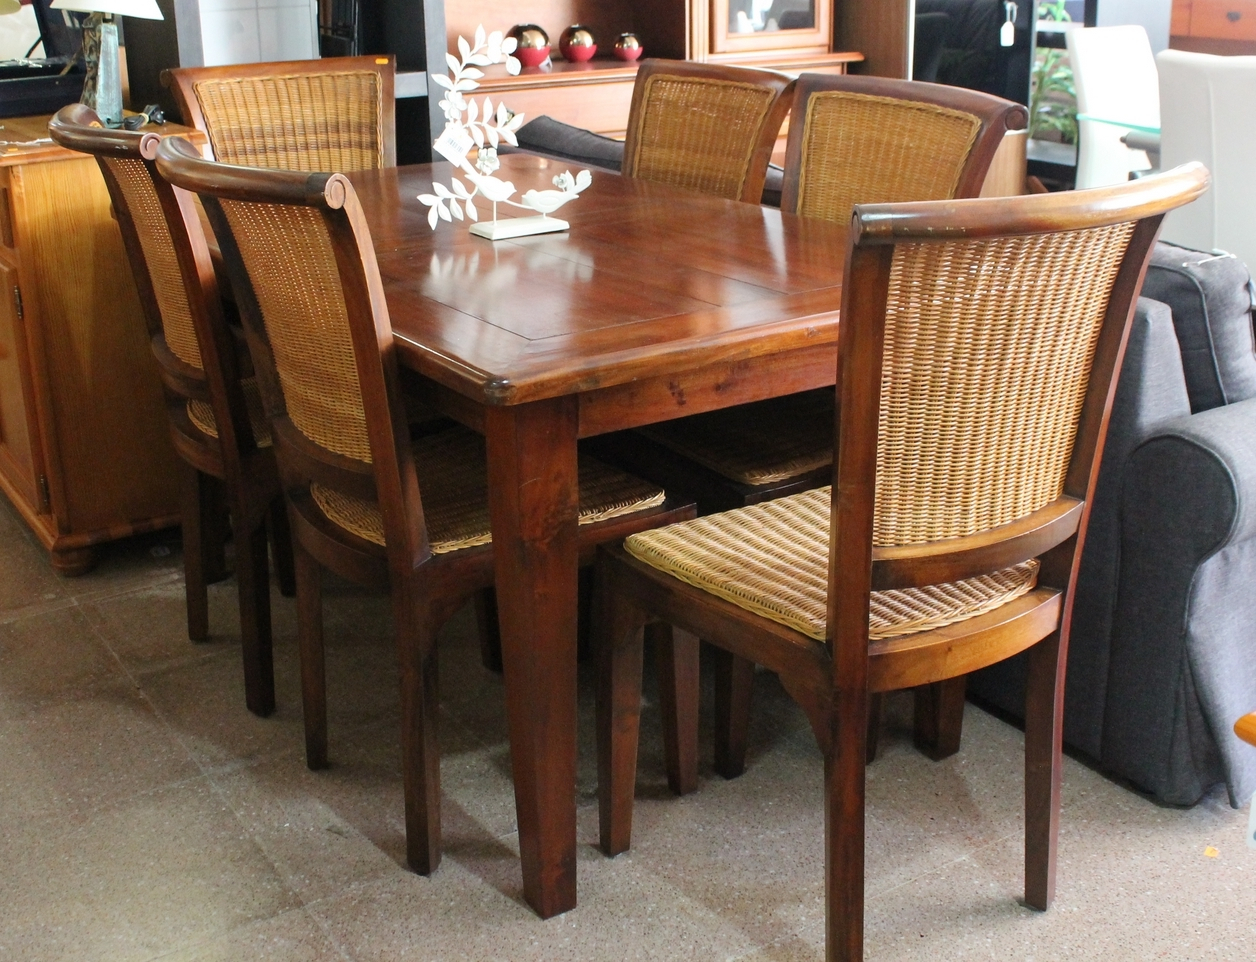 Second Hand Dining Room Table And 6 Chairs